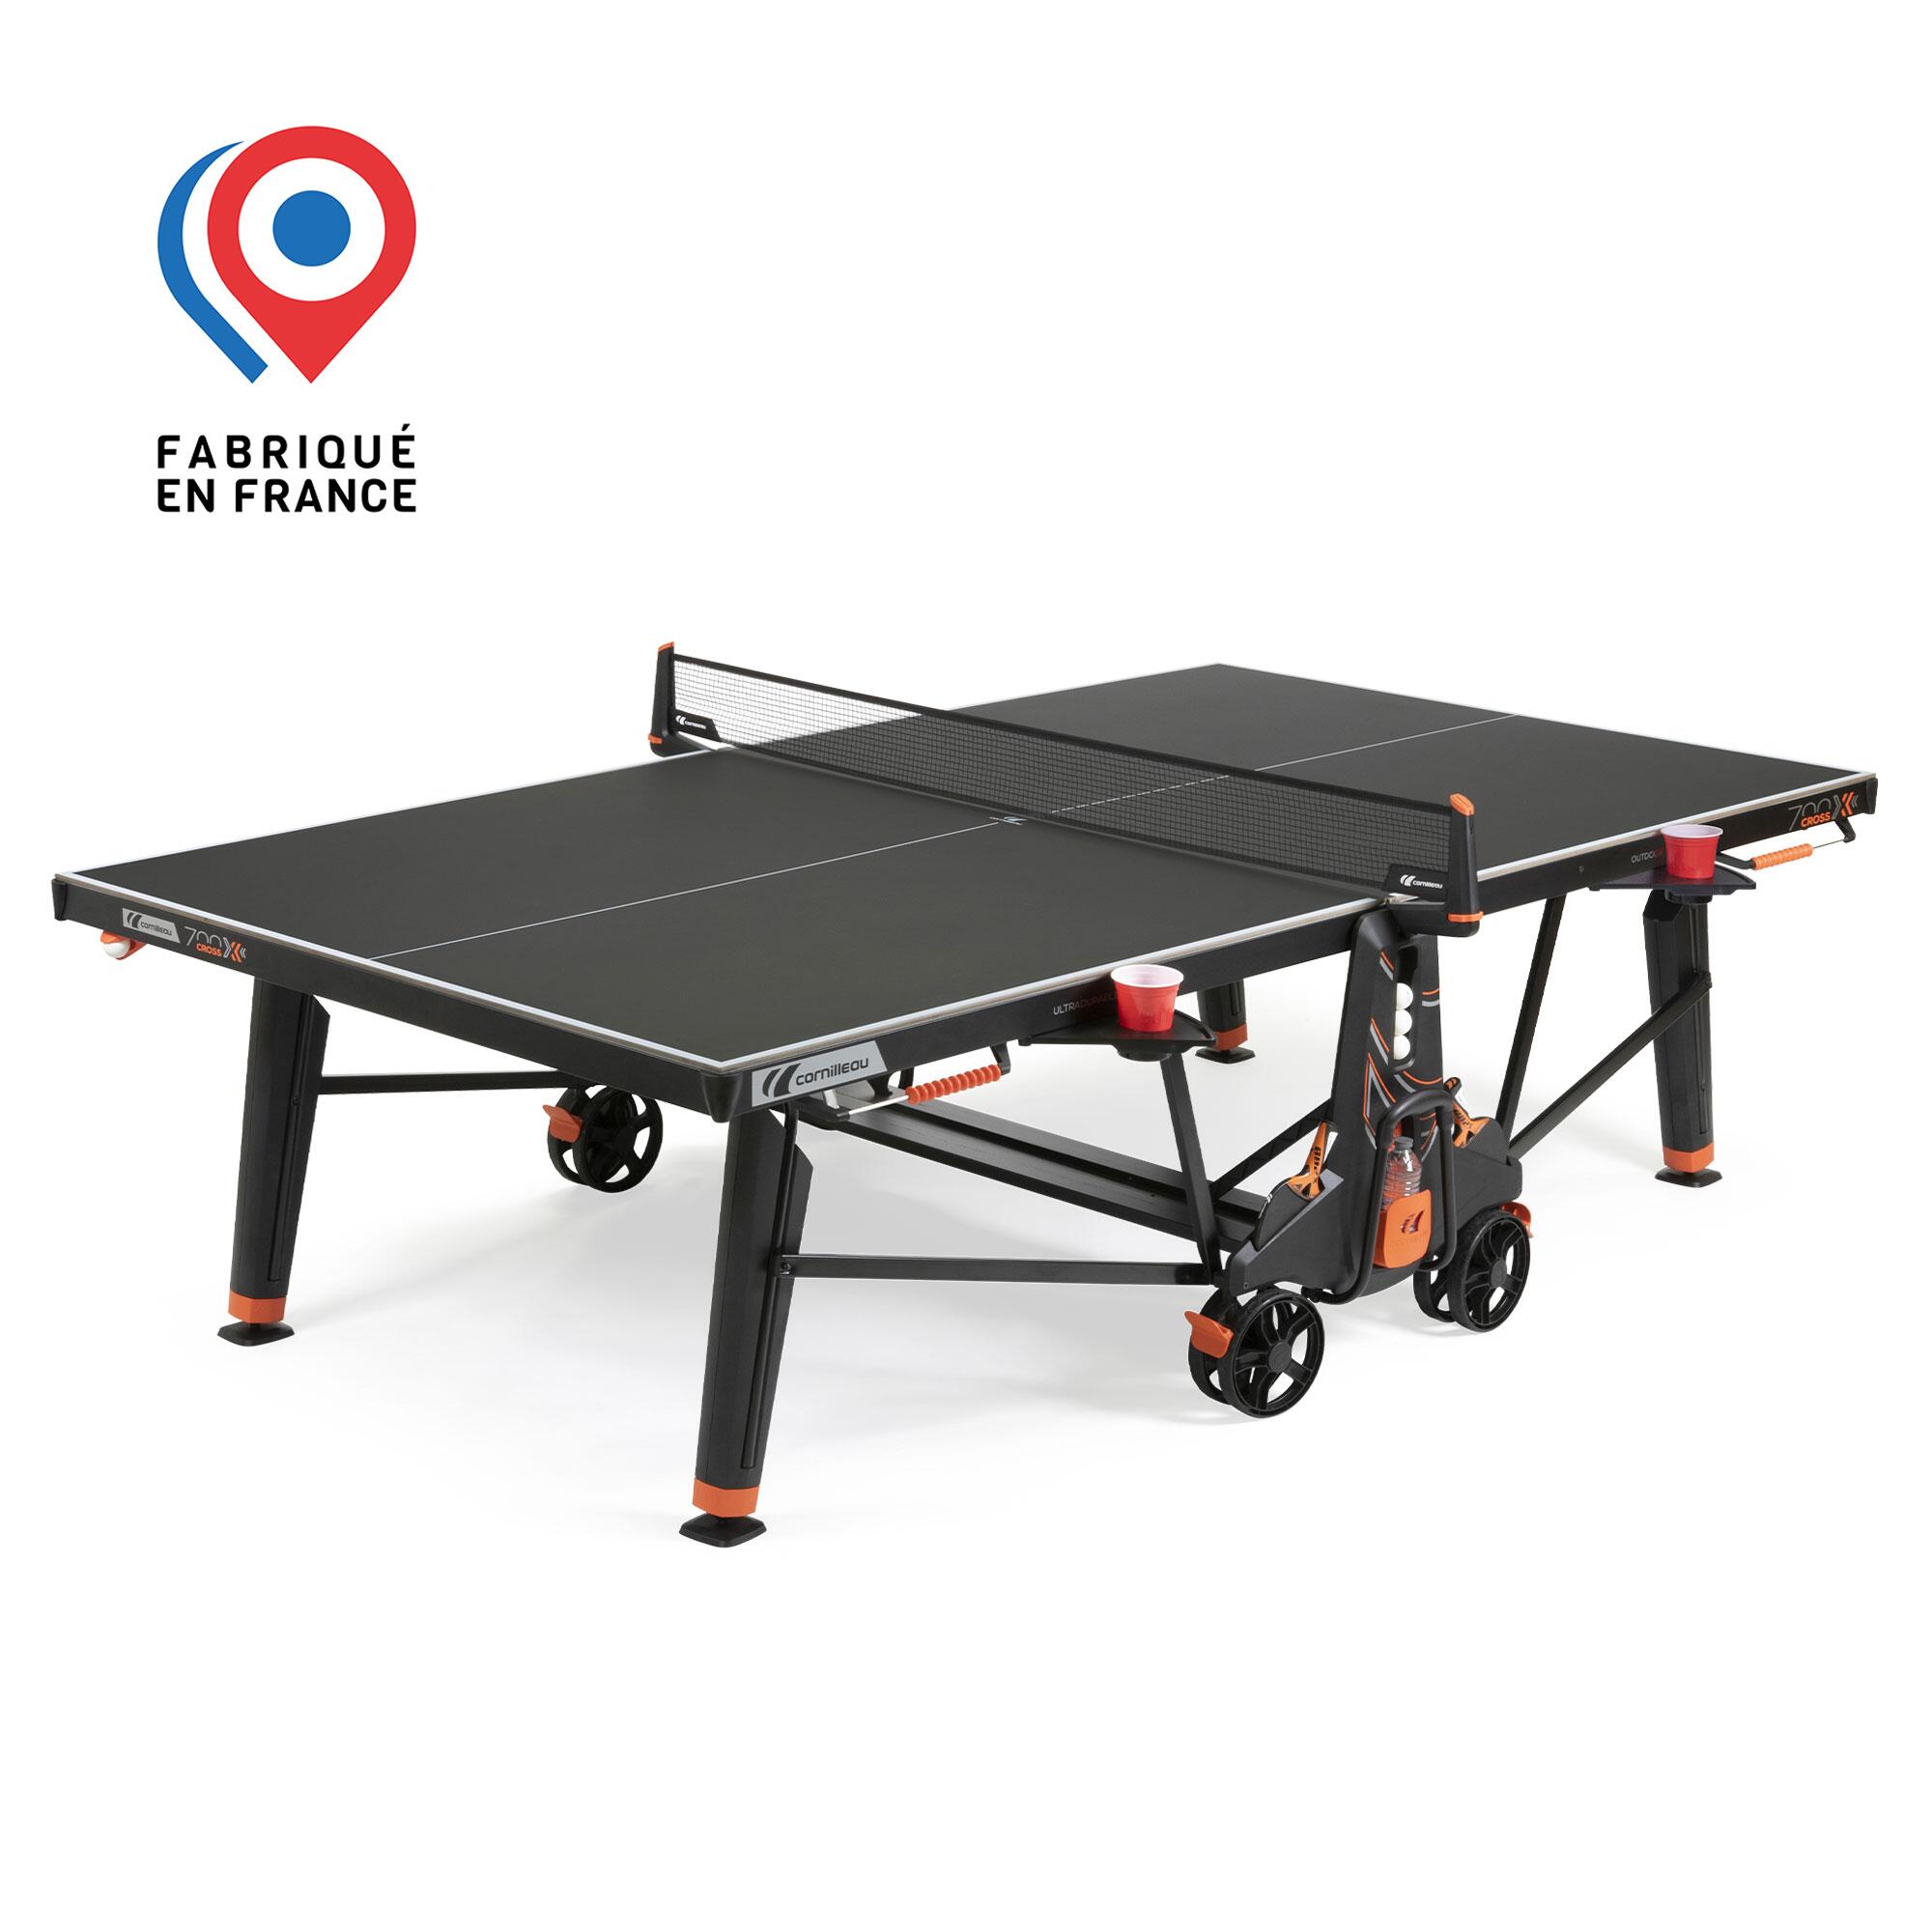 CORNILLEAU 700X Performance Outdoor Table Tennis Table